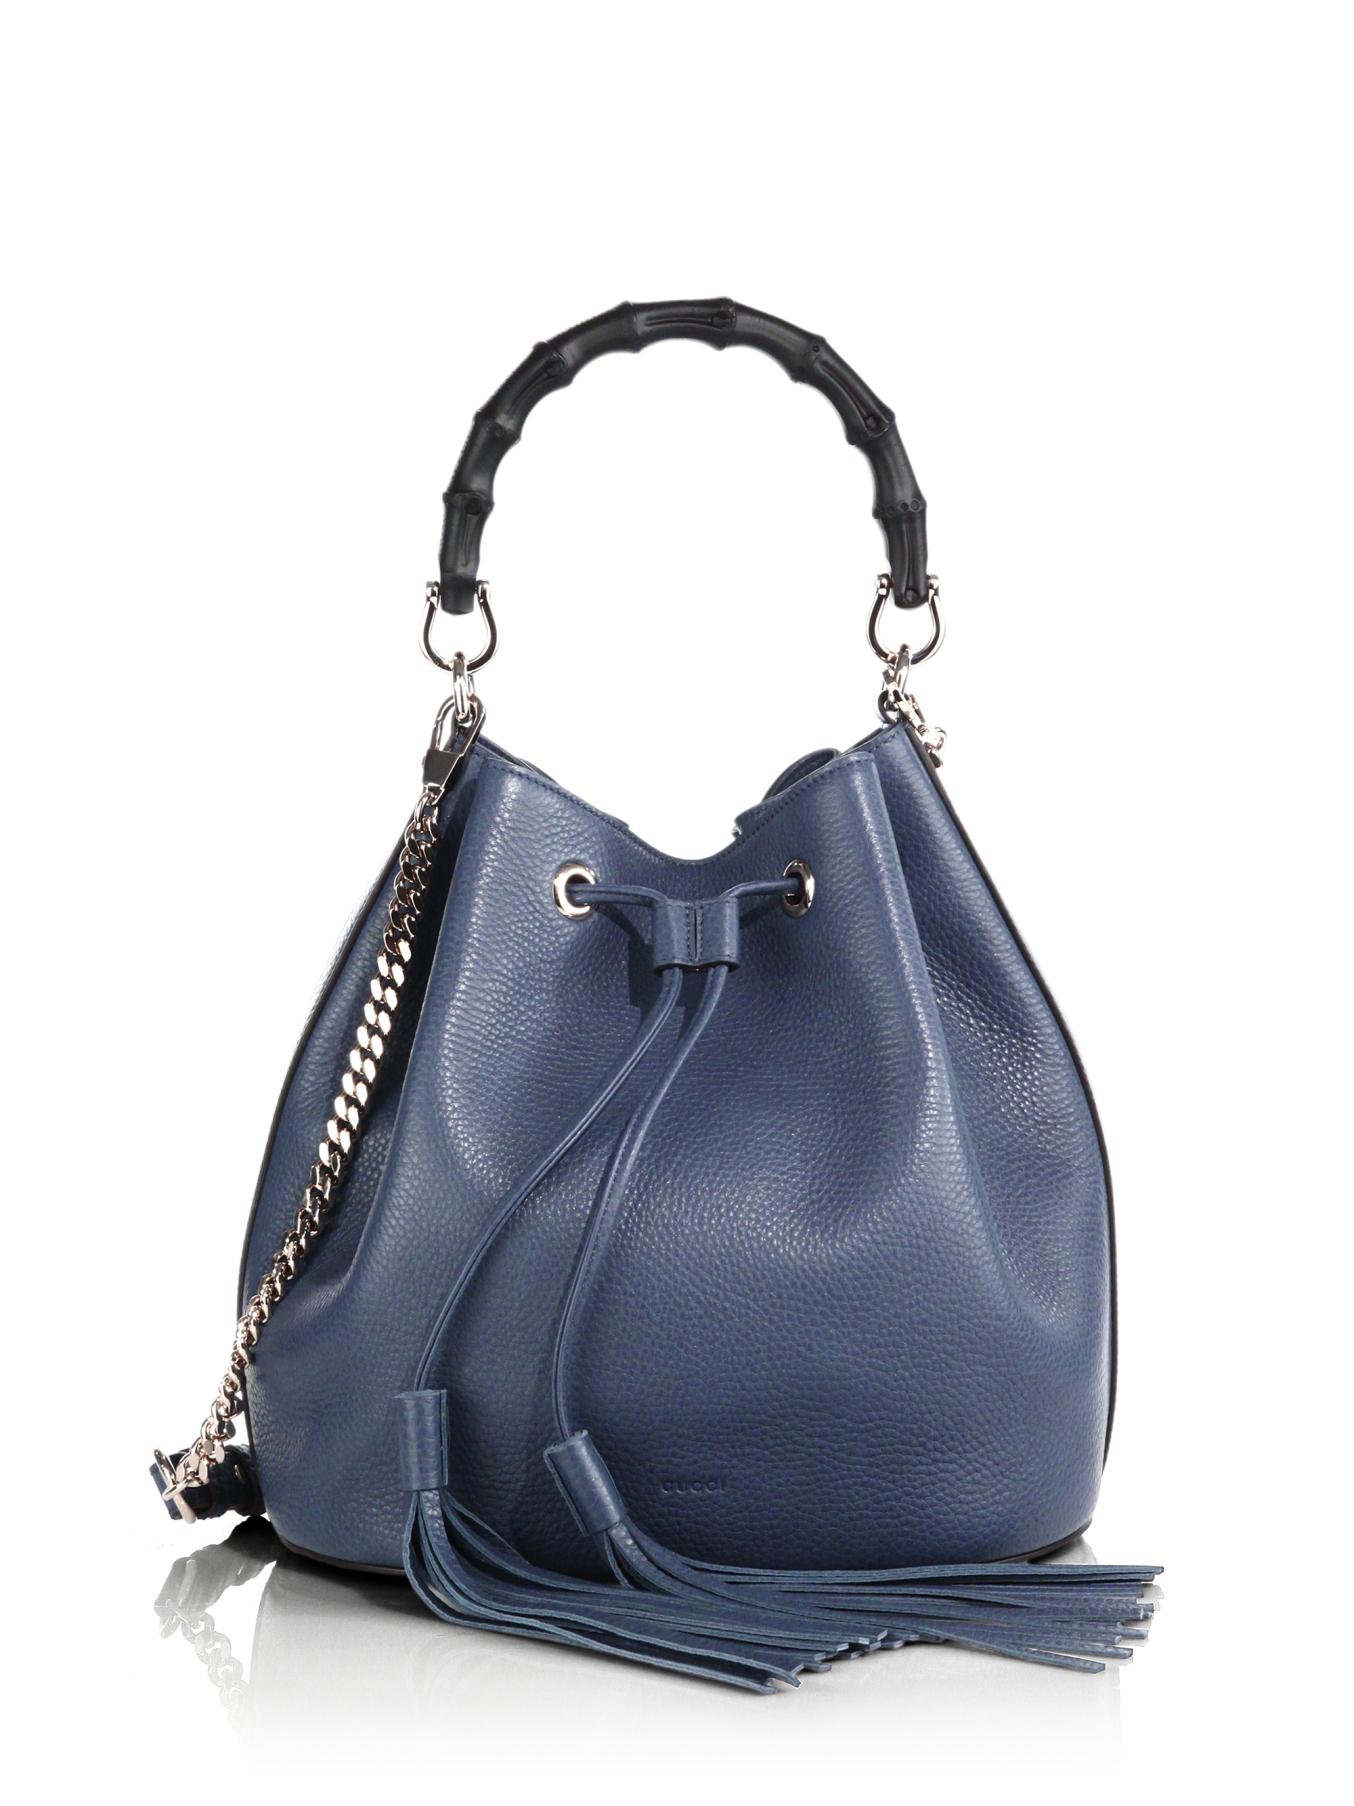 Gucci Miss Bamboo Leather Bucket Bag in 